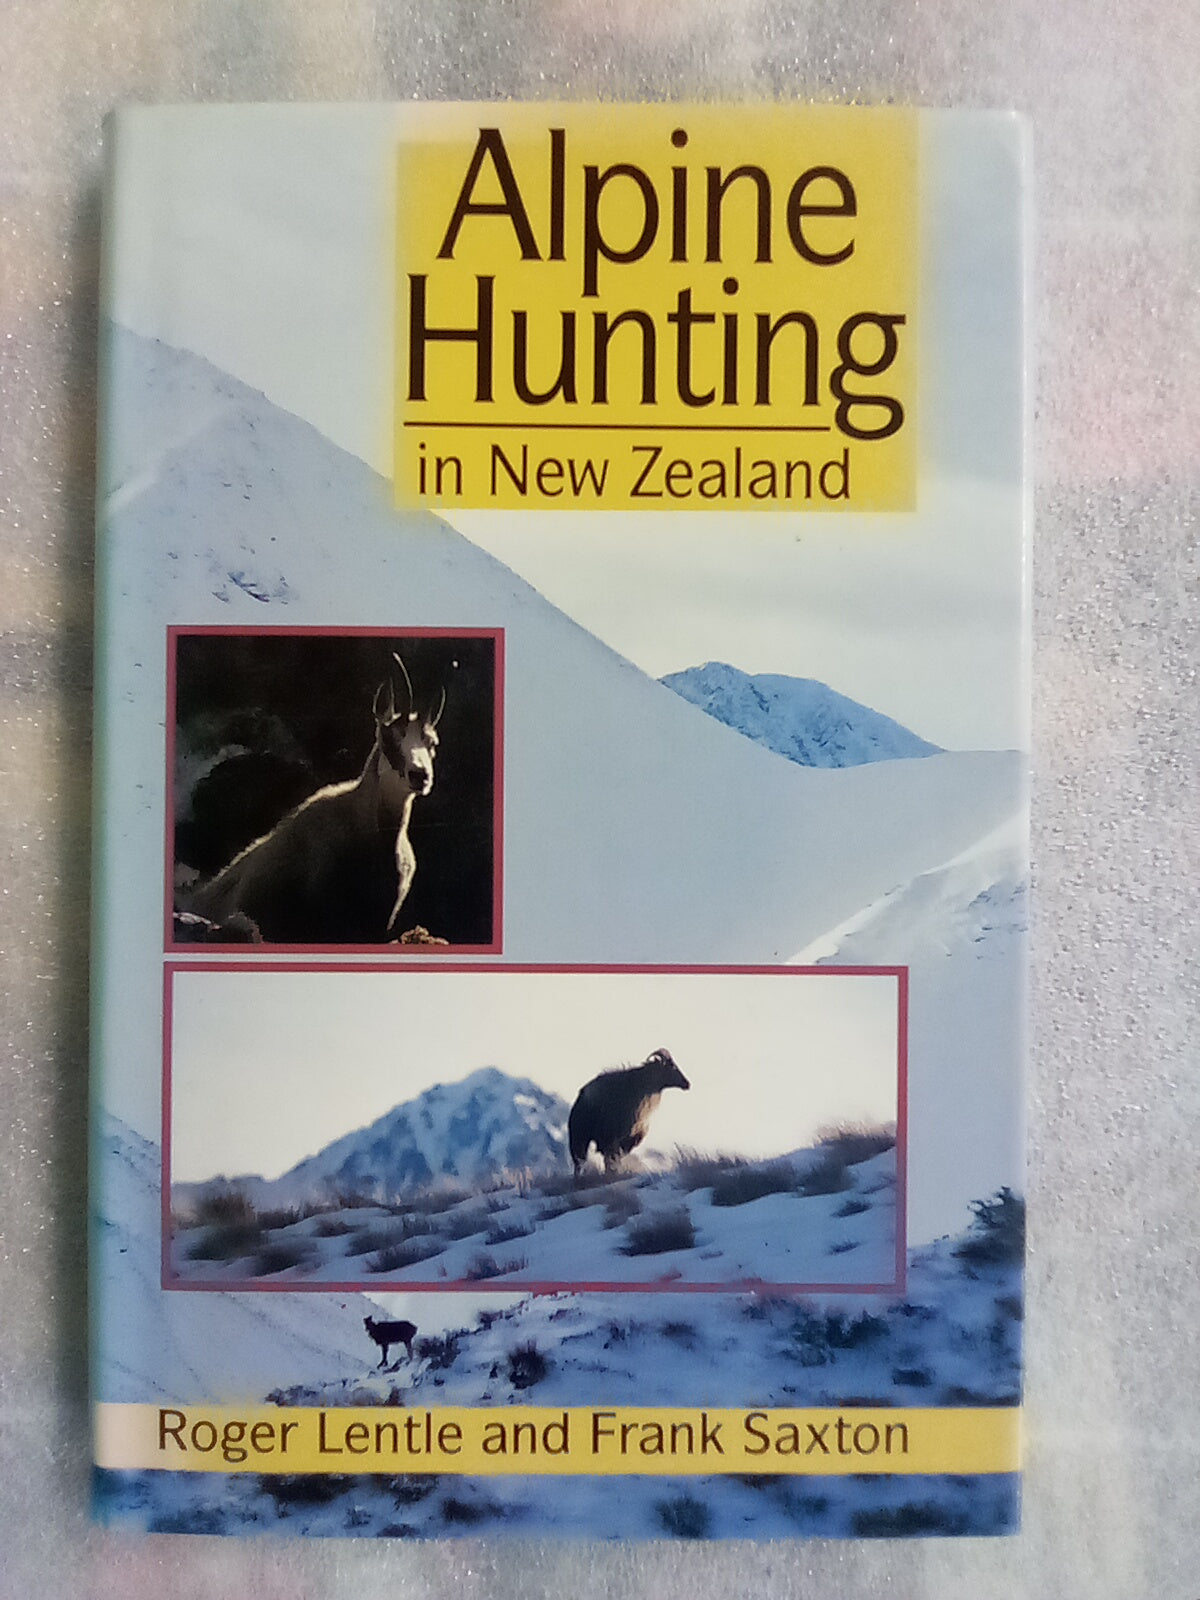 Alpine Hunting in New Zealand by Roger Lentle and Frank Saxton